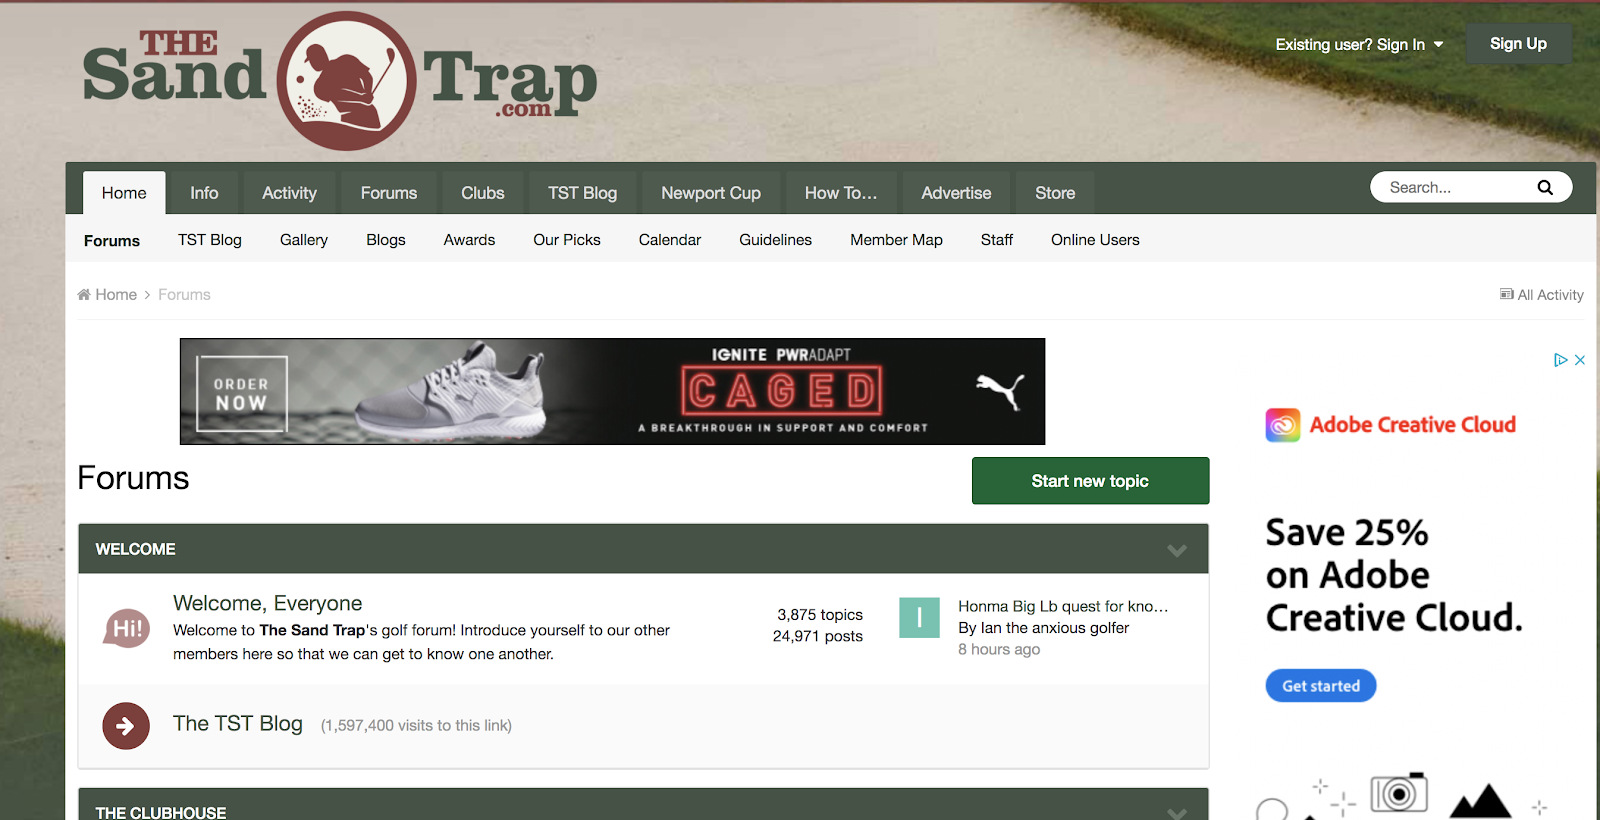 The Sand Trap Screenshot (Example of a Discussion Site for Blog Marketing Efforts)